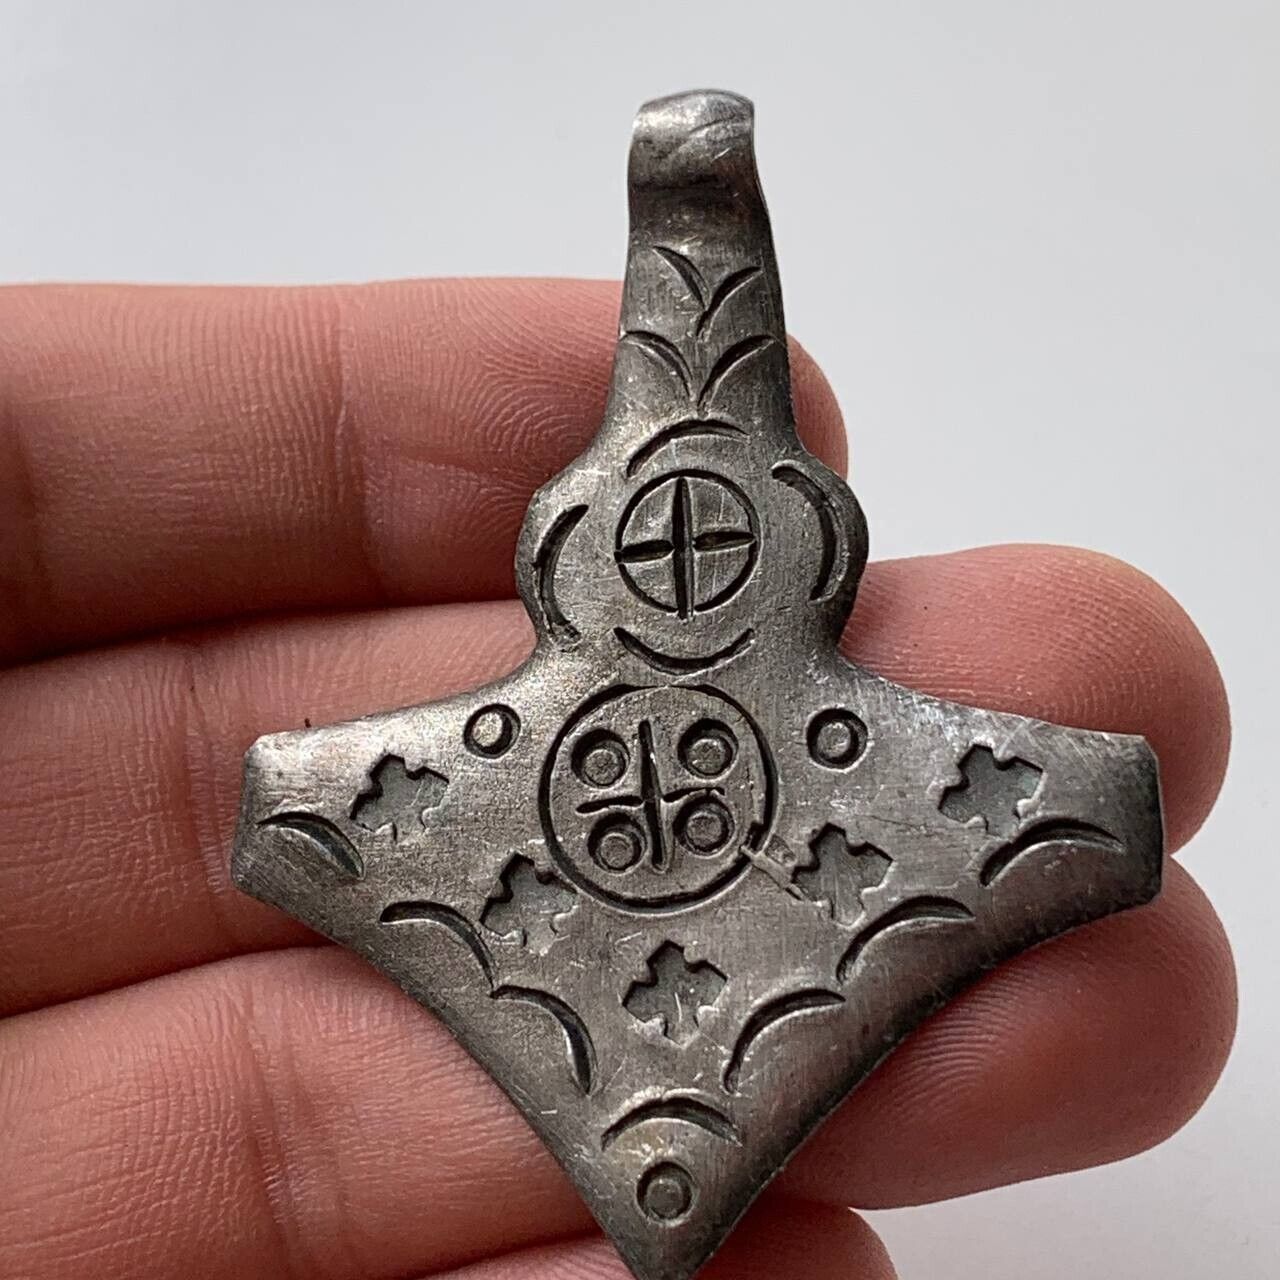 VERY OLD RARE ANCIENT VIKING AMULET SILVER ARTEFACT AUTHENTIC STUNNING